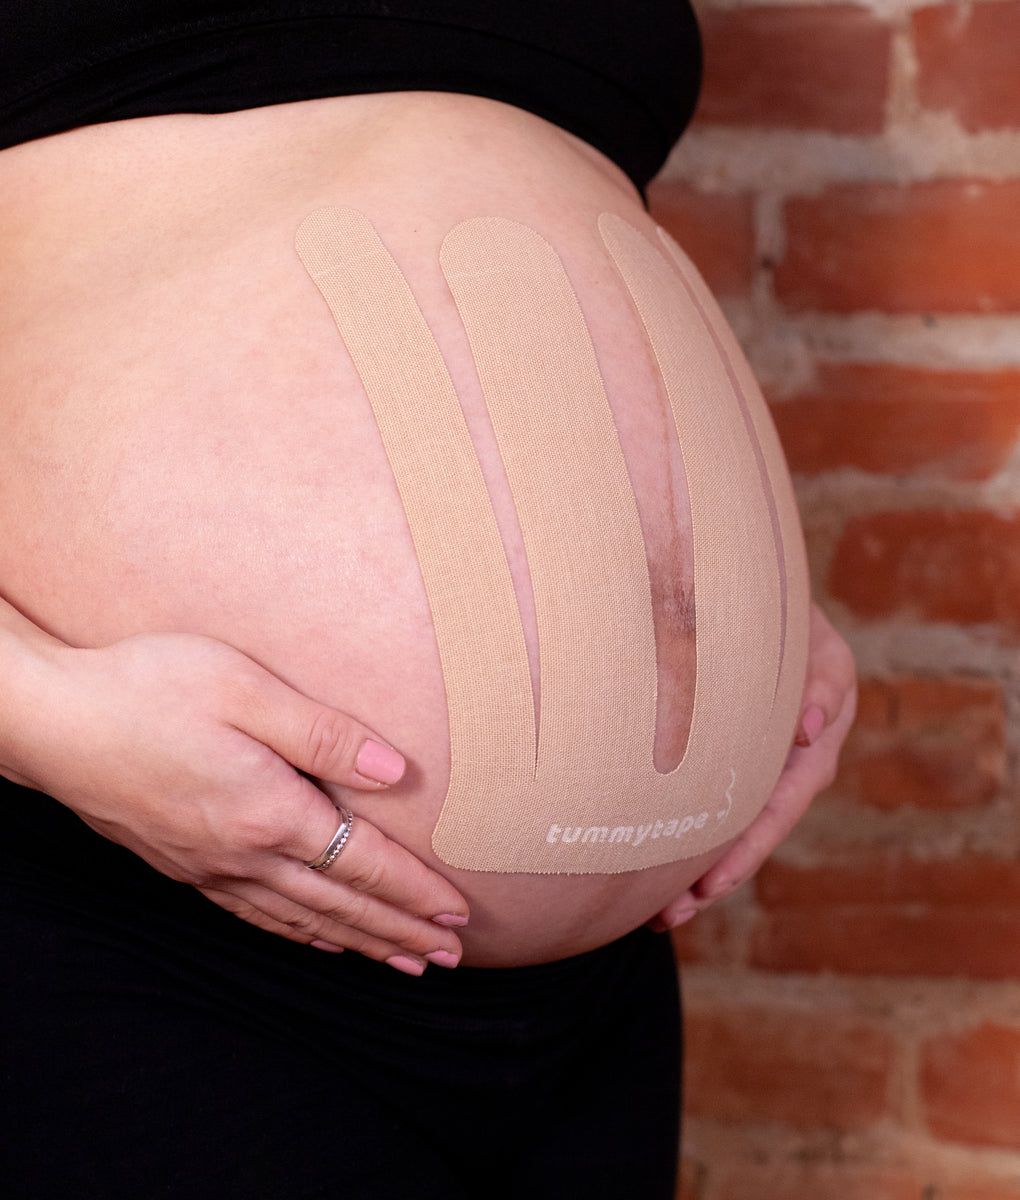 Pregnancy Belly Taping 